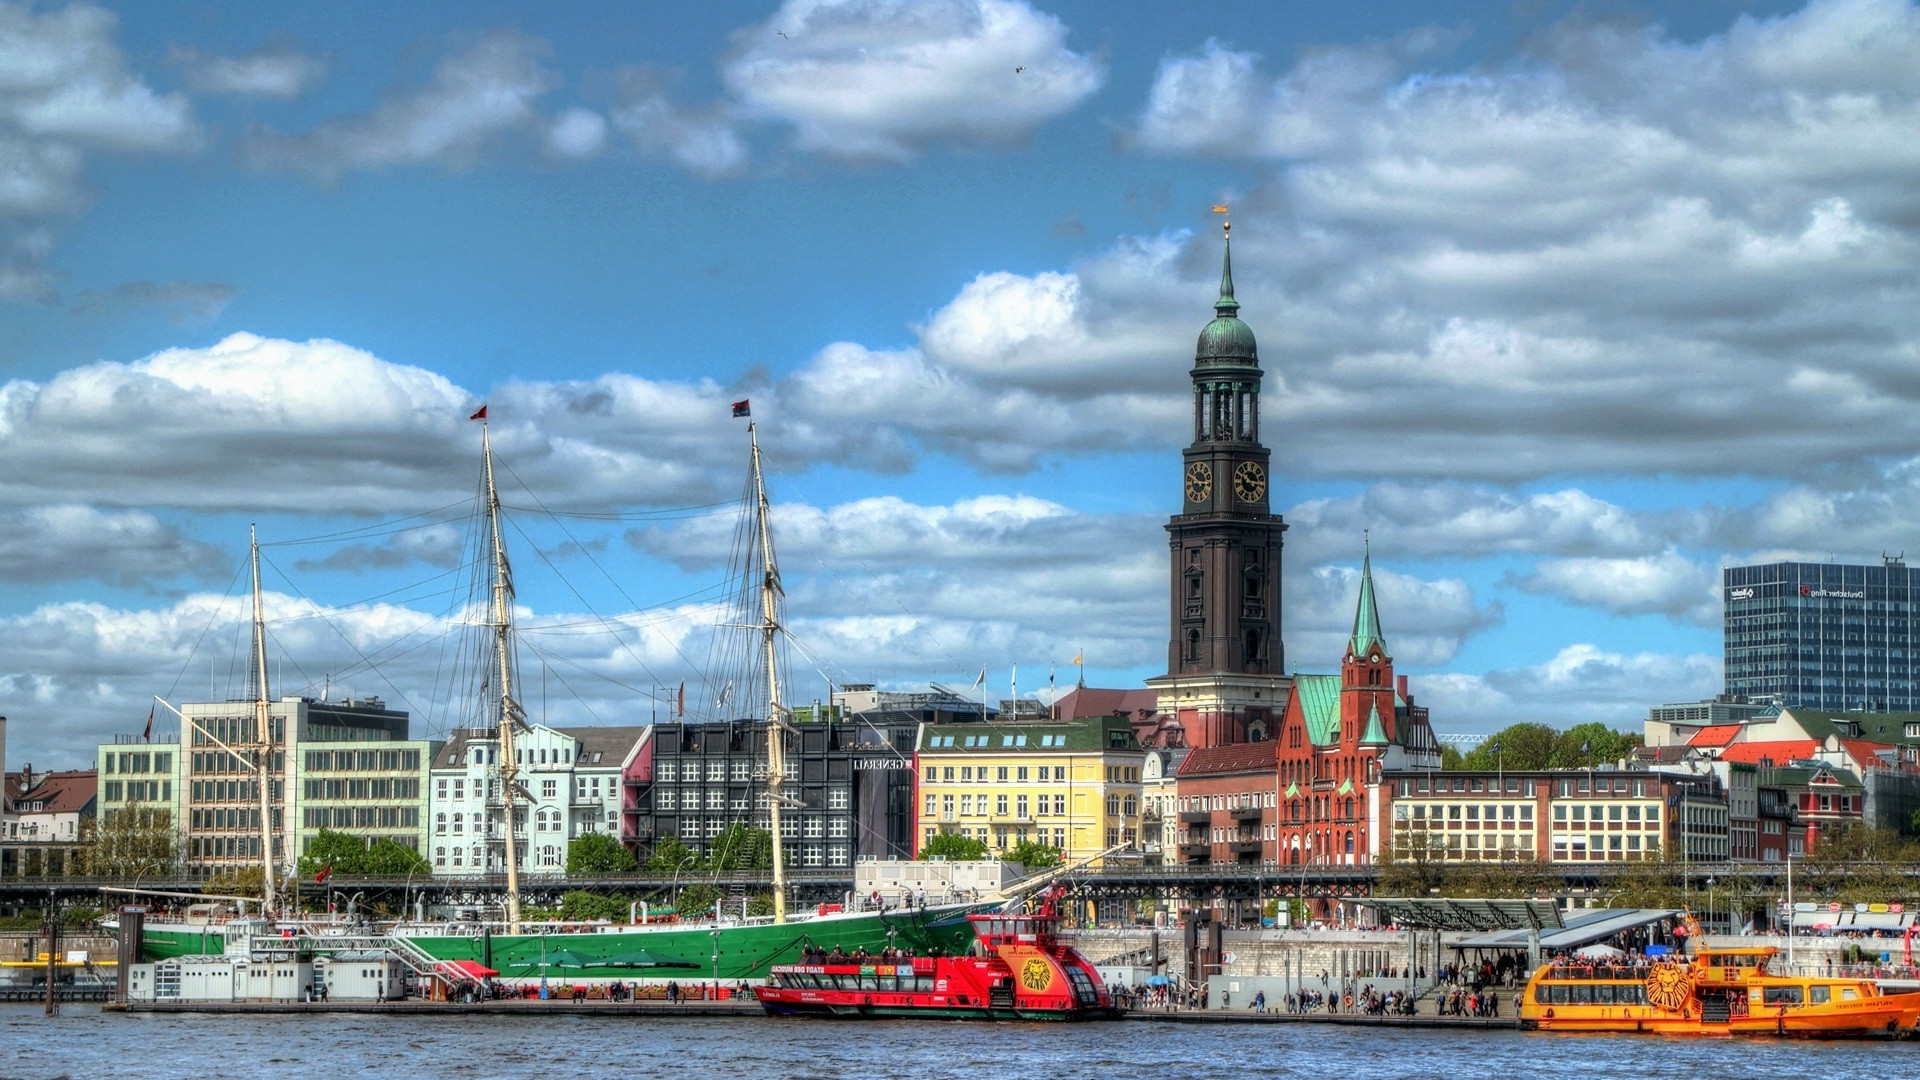 city, Cityscape, Architecture, Sky, Building, Hamburg, Germany, Ports, Dock, Clouds, Church, Ship, People, HDR, River, Flag, Old Building Wallpaper